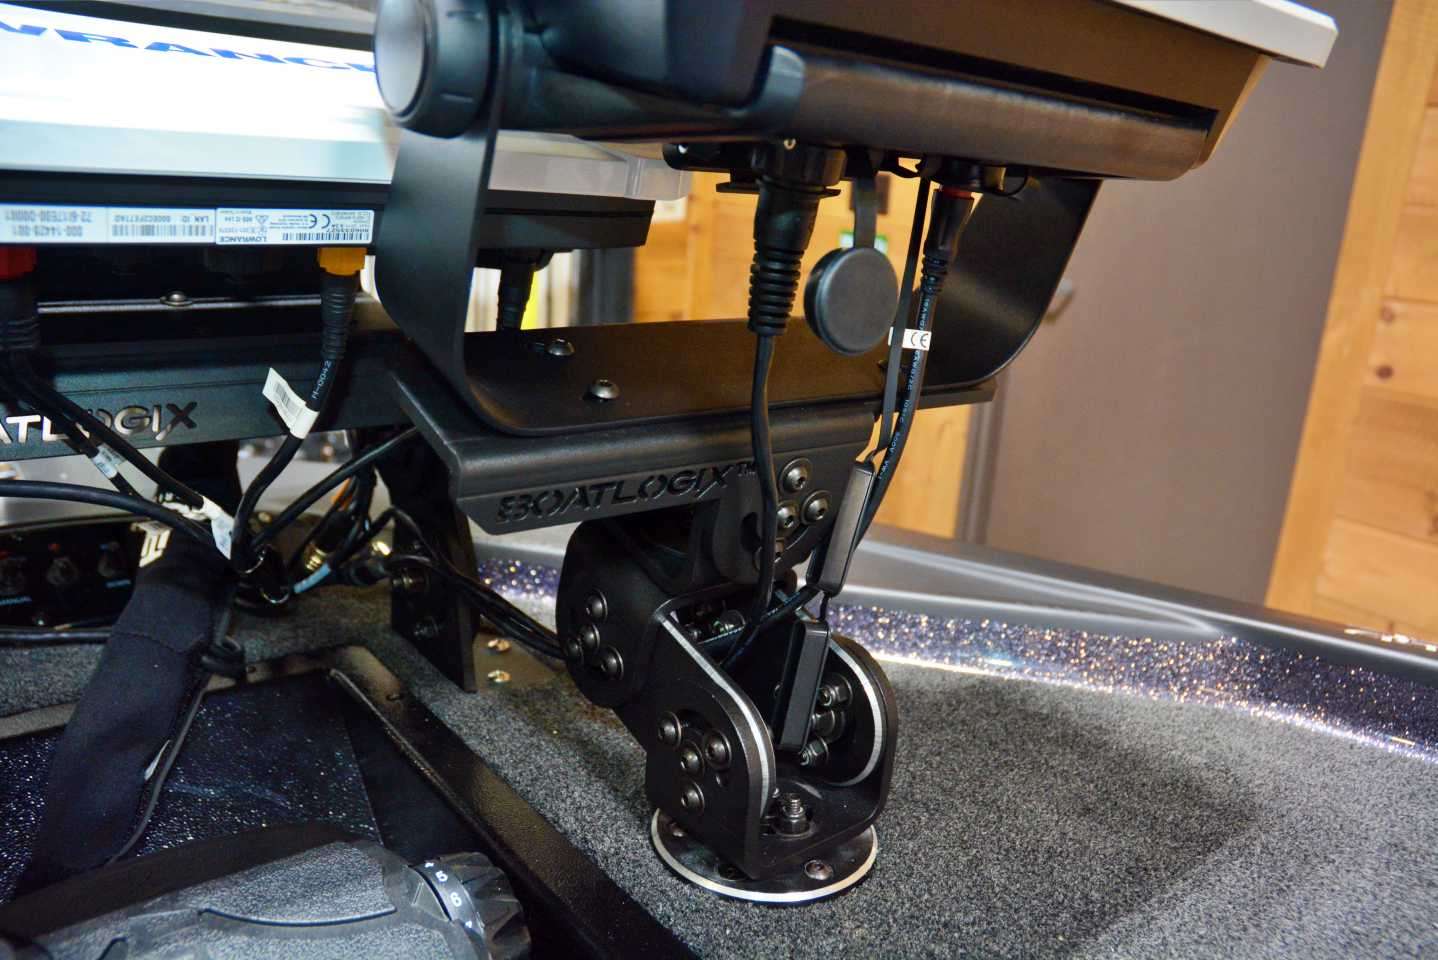 The Garmin is rigged to the new BoatLogix pedestal mount that swivels 360 degrees and horizontally or vertically. 
